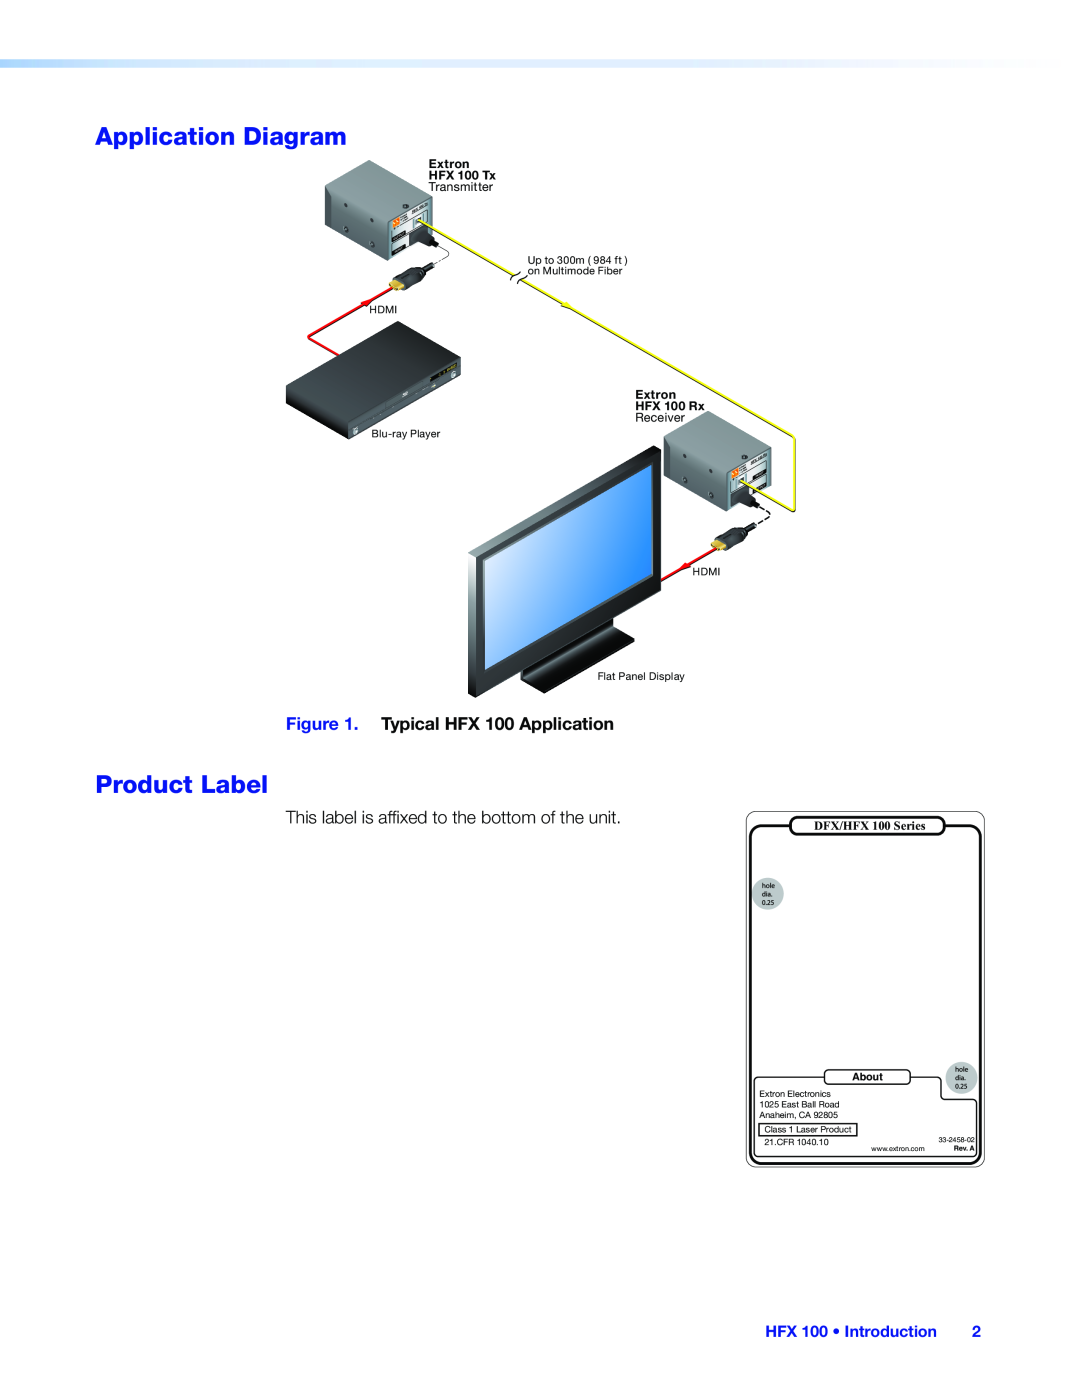 Extron electronic HFX 100 TX Application Diagram, Product Label, HFX 100 Introduction, Extron HFX 100 Tx, About, Rev. A 